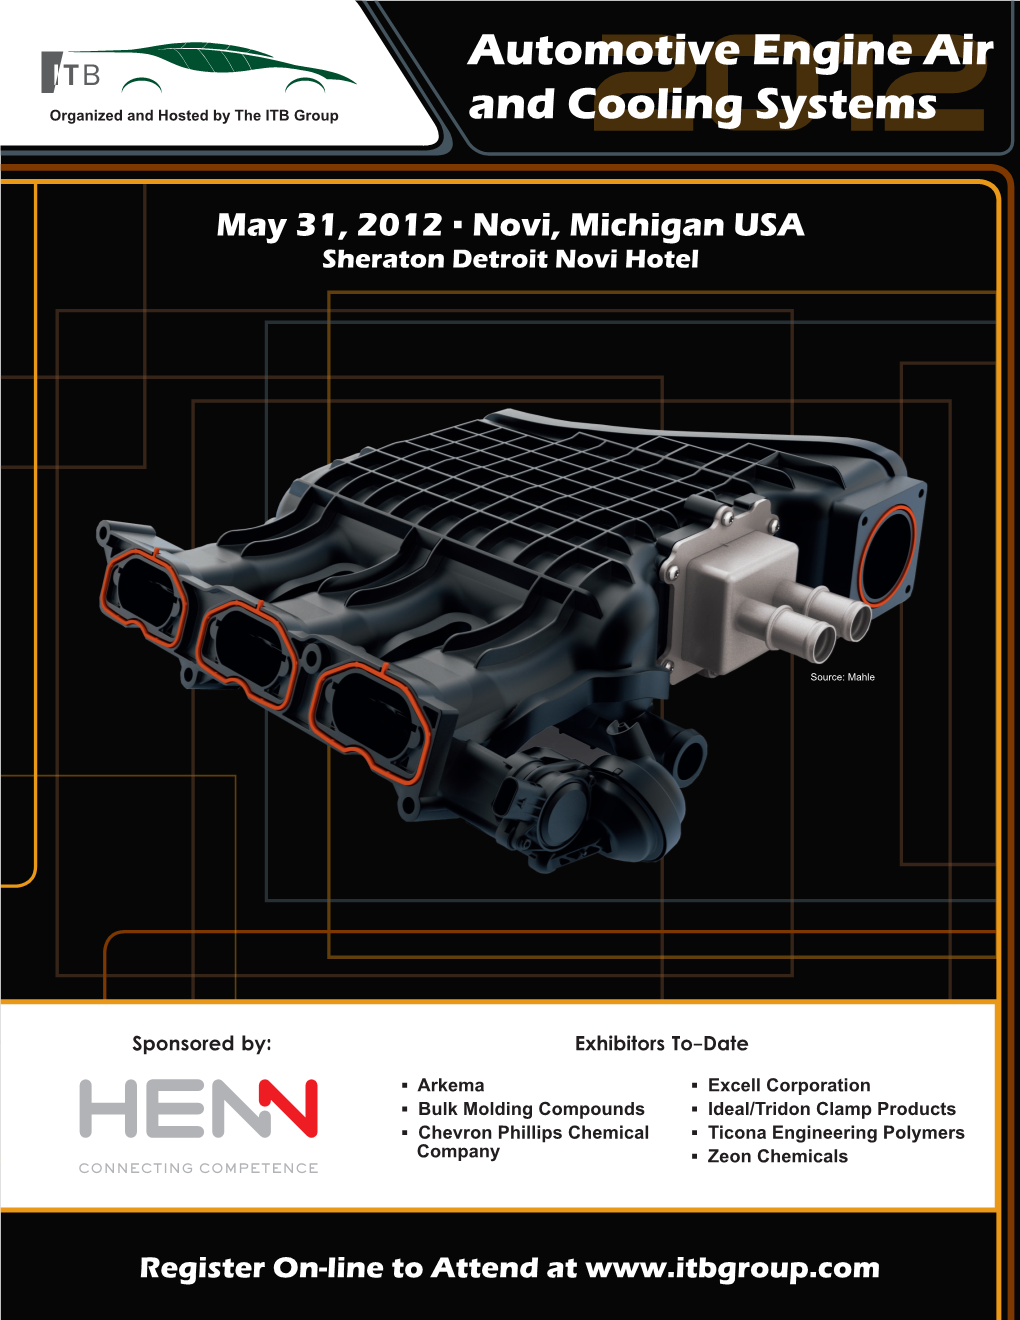 Automotive Engine Air and Cooling Systems 2012